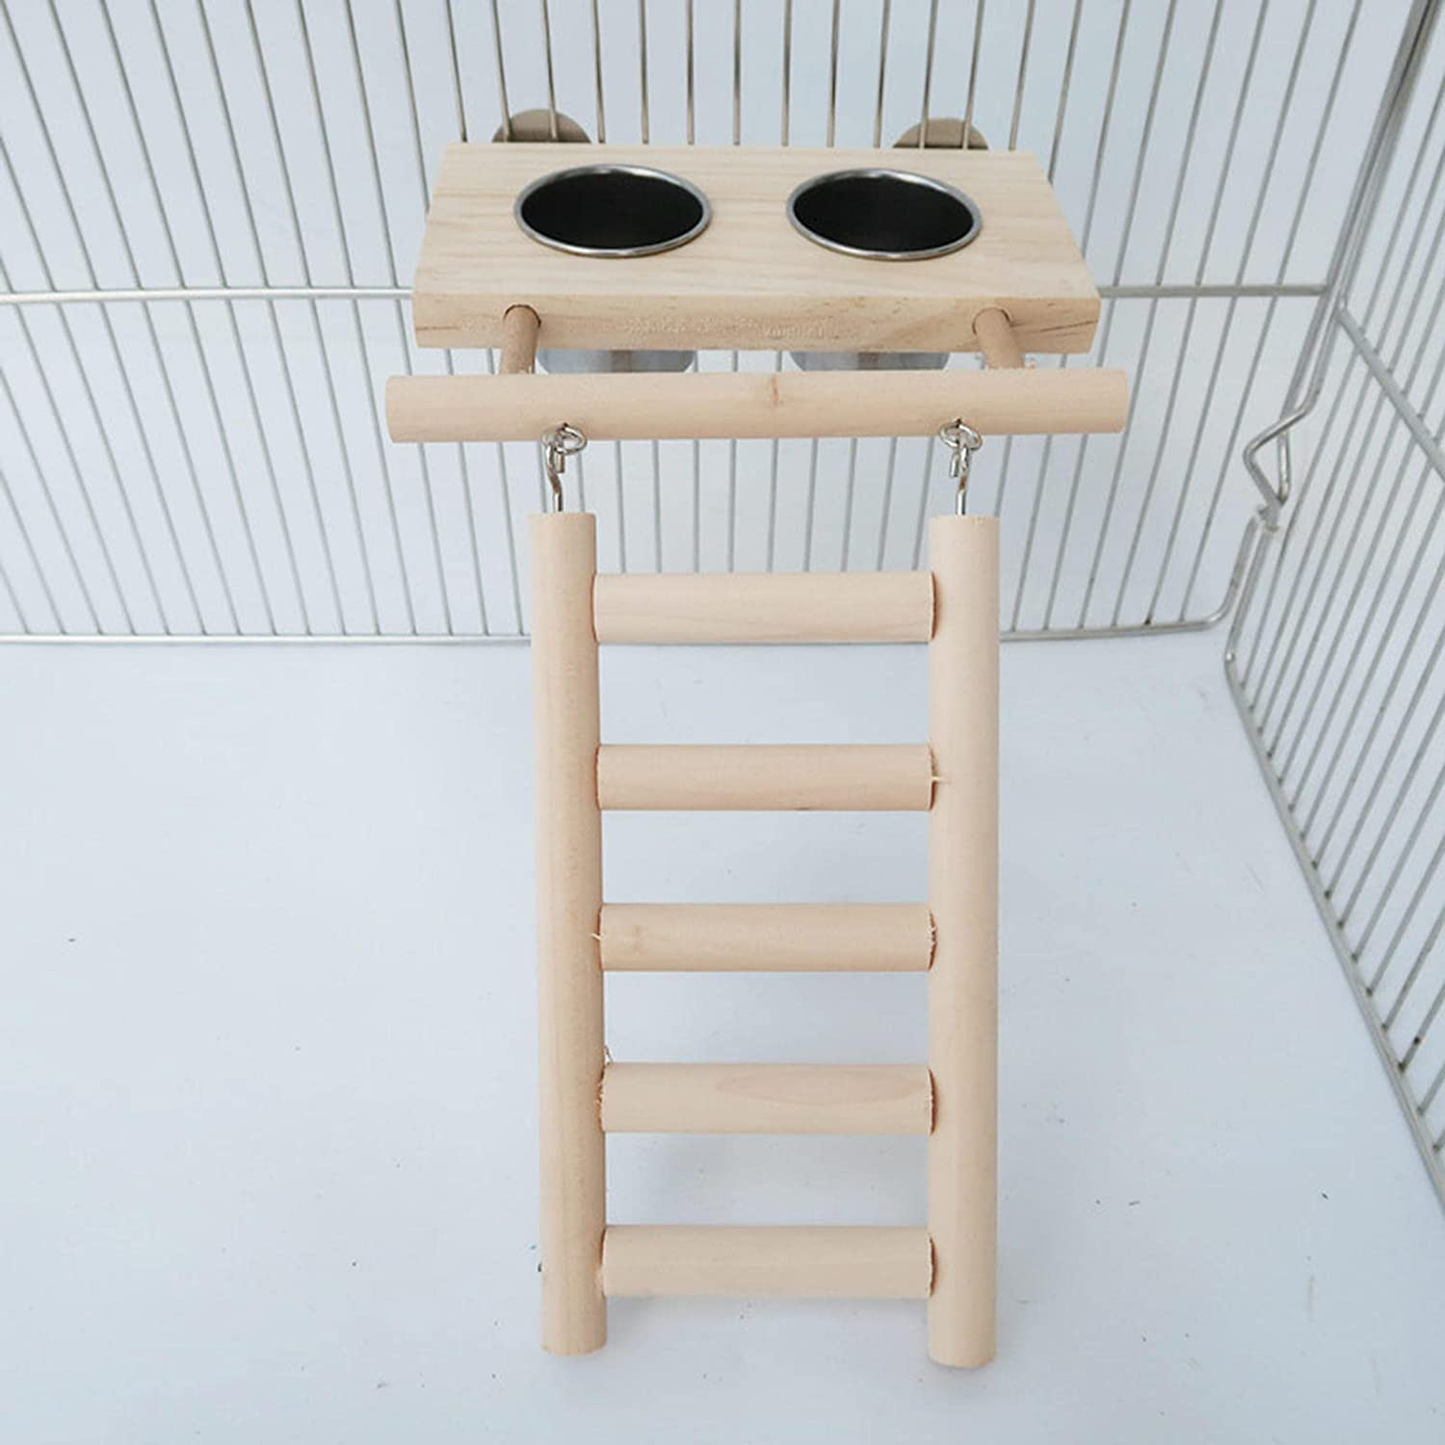 Gazechimp Pet Play Stand for Birds-Parrot Playstand Bird Cockatiel Playground Wood Perch Gym Climbing Ladder Feeder Cups Toys Exercise Play Gift